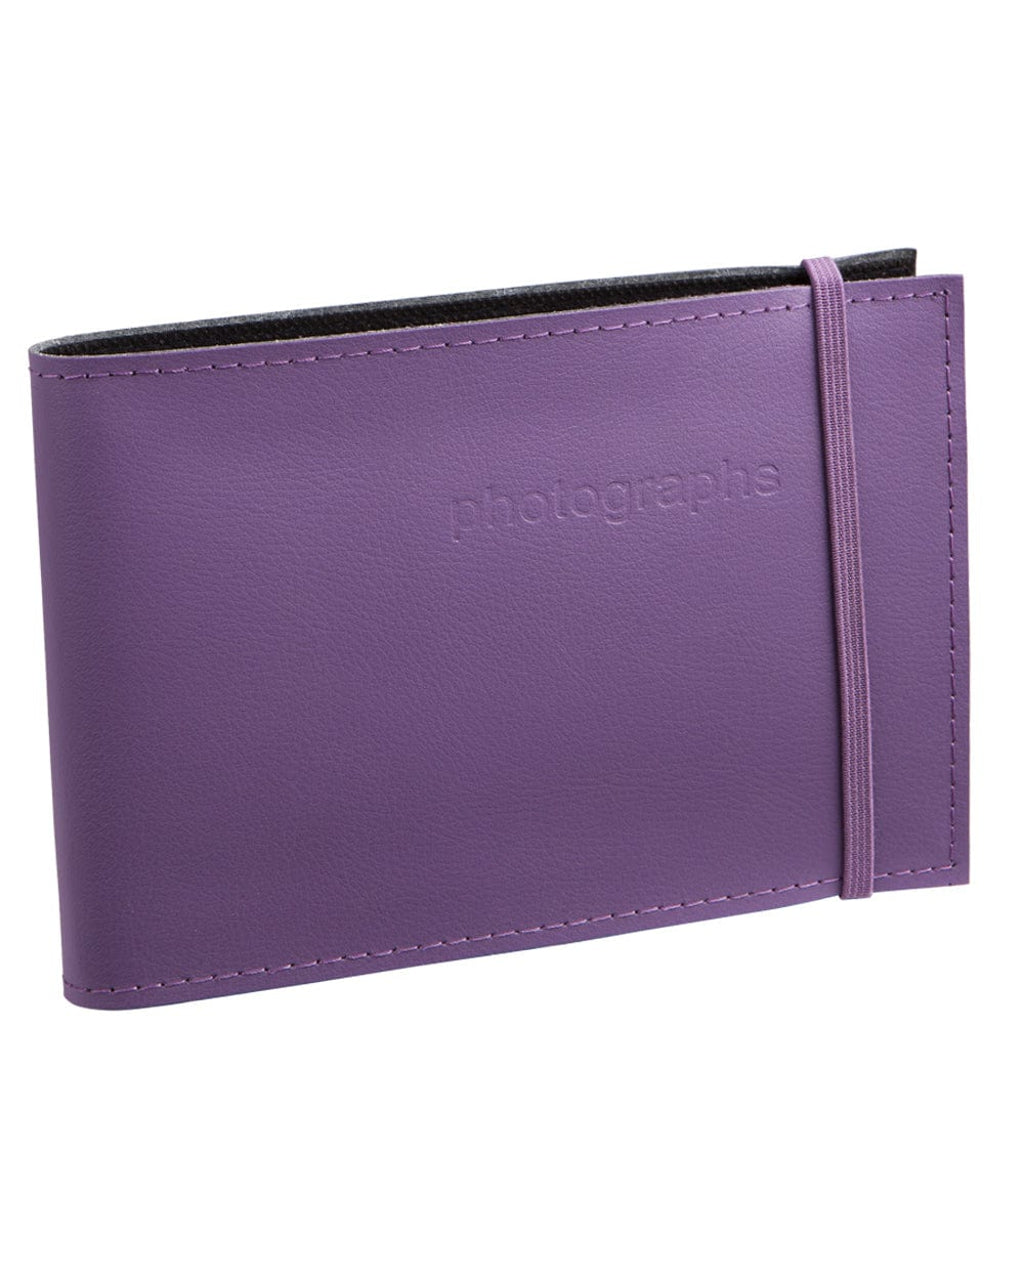 Citi Leather Plum Slip-in Bragbook Photo Album from our Photo Albums collection by Profile Products Australia